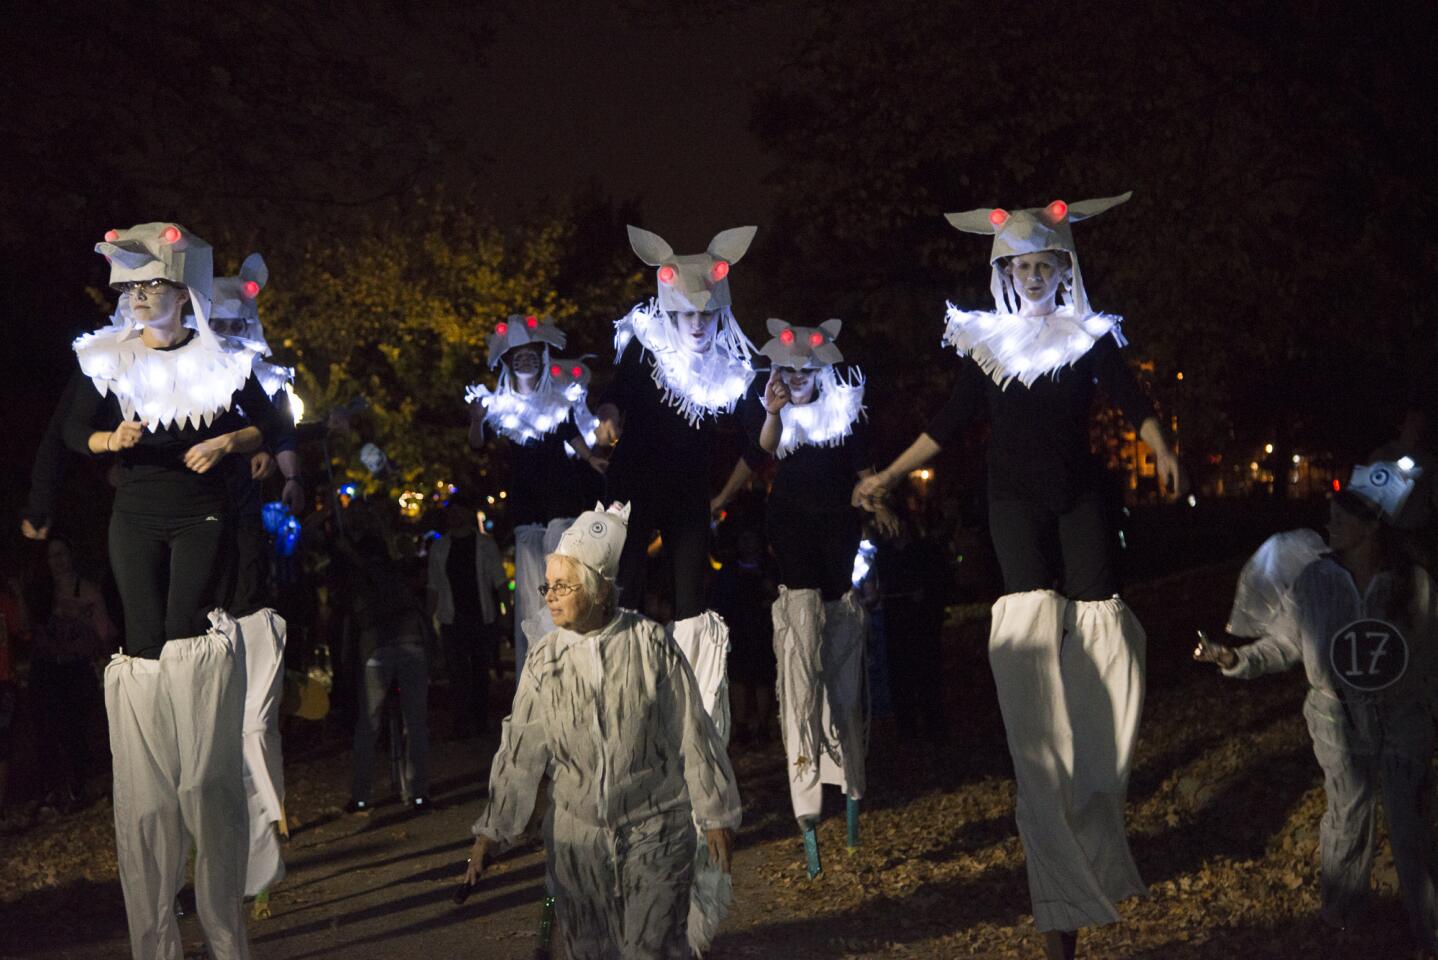 Stilt-walkers from The Nana Project, a Baltimore artistic parade and arts organization walk in the Lantern Parade at Patterson Park on Saturday. The Lantern Parade brought costumes of all sorts, families, artists, performers, and people for all over the city and the country to participate in this yearly Halloween celebration. The Nana Project has participated in the Lantern Parade from the beginning of the event.